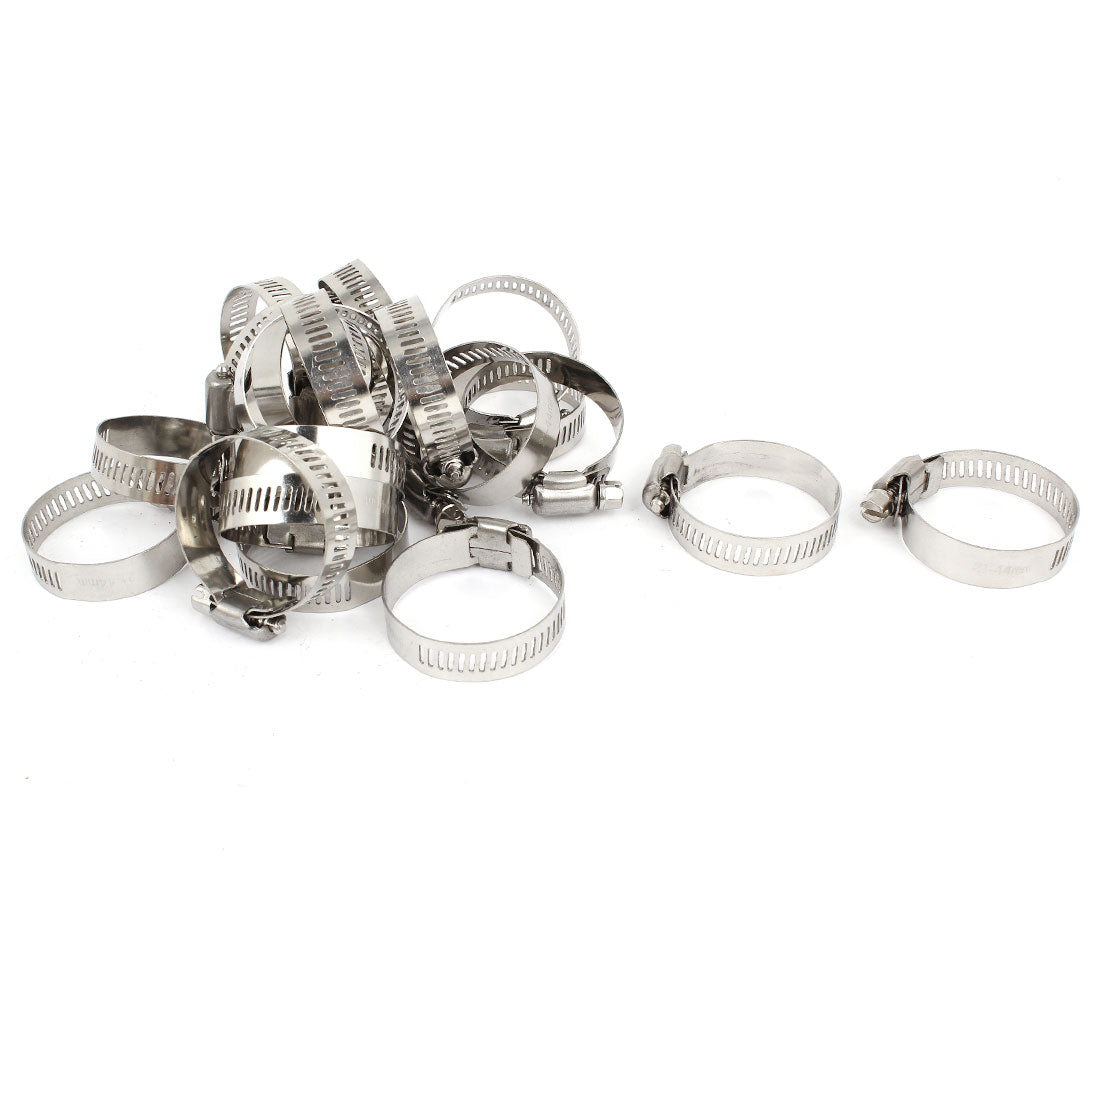 uxcell Uxcell 25 Pcs 21-44mm Range Stainless Steel Adjustable Band  Hose Clamps